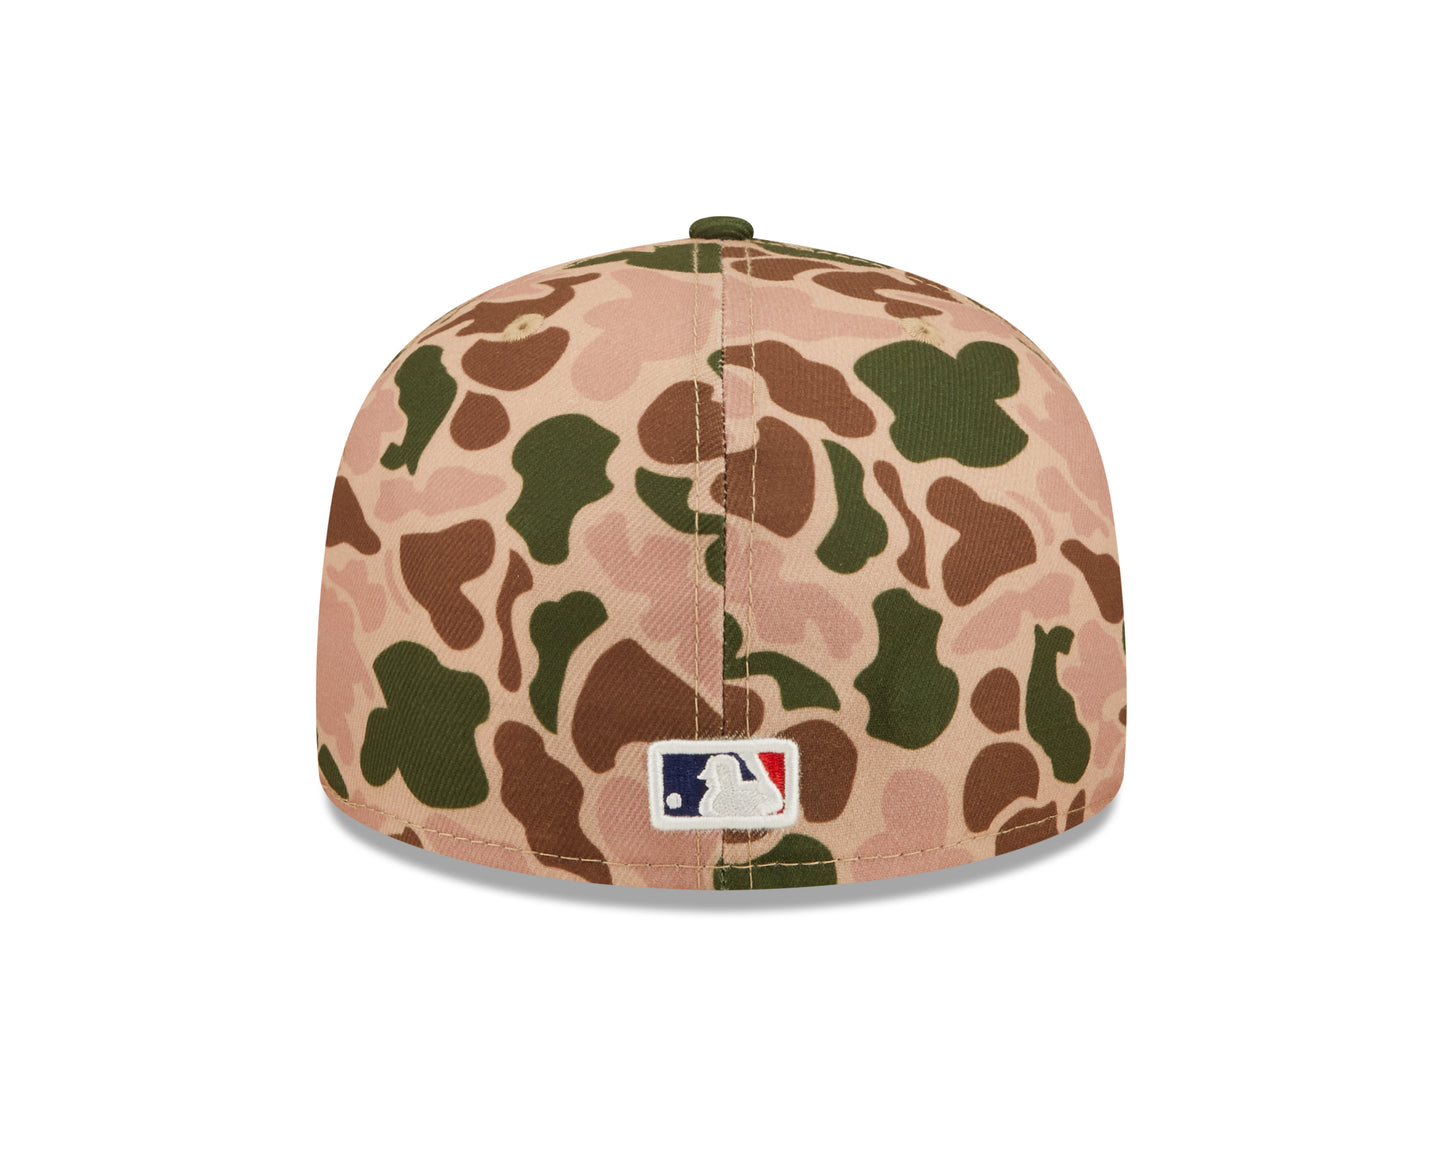 St. Louis Cardinals Duck Camo World Series 2011 Side Patch 59fifty Fitted Hat